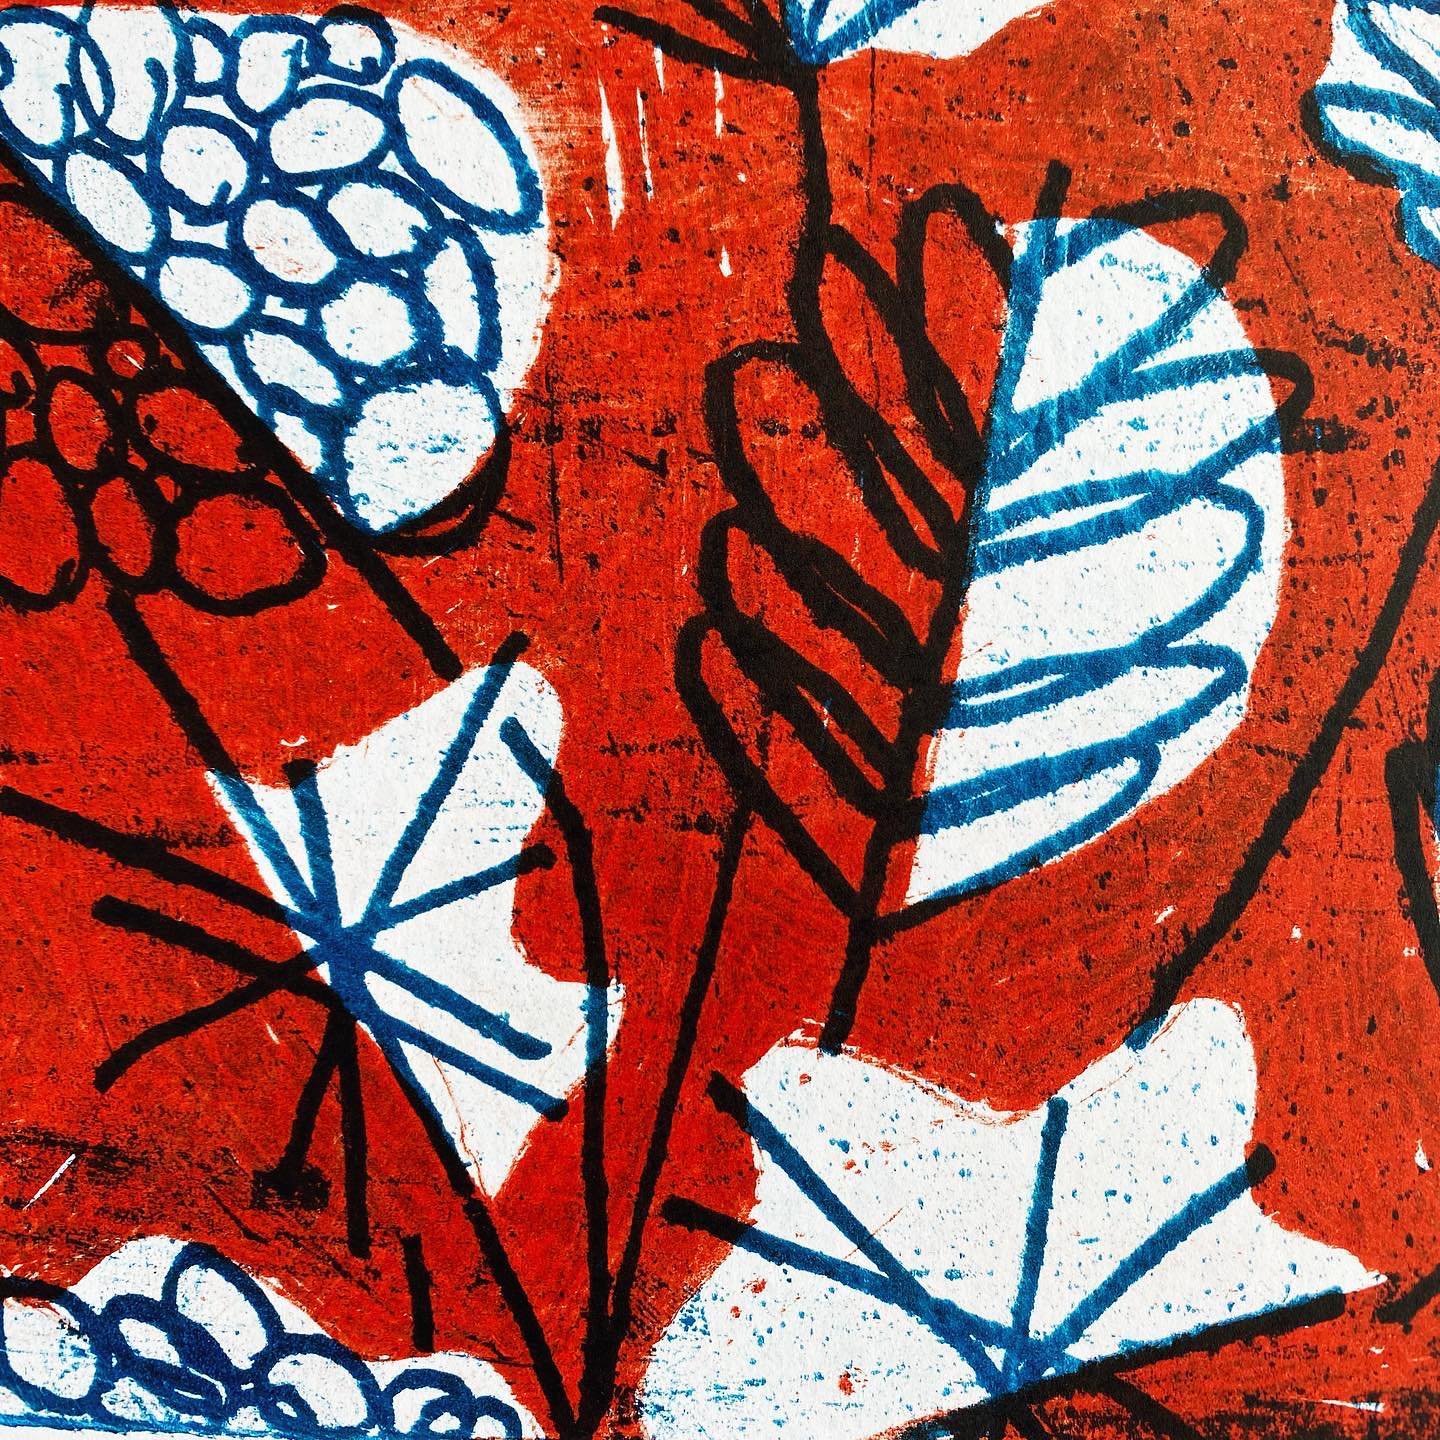 Super pleased with my print from today&rsquo;s session with @fionahprints at @spikeprintstudio on our Kitchen Litho course. Left my comfort zone to print in colour for once and pretty pleased with the results. Reminds me of vintage textiles design or